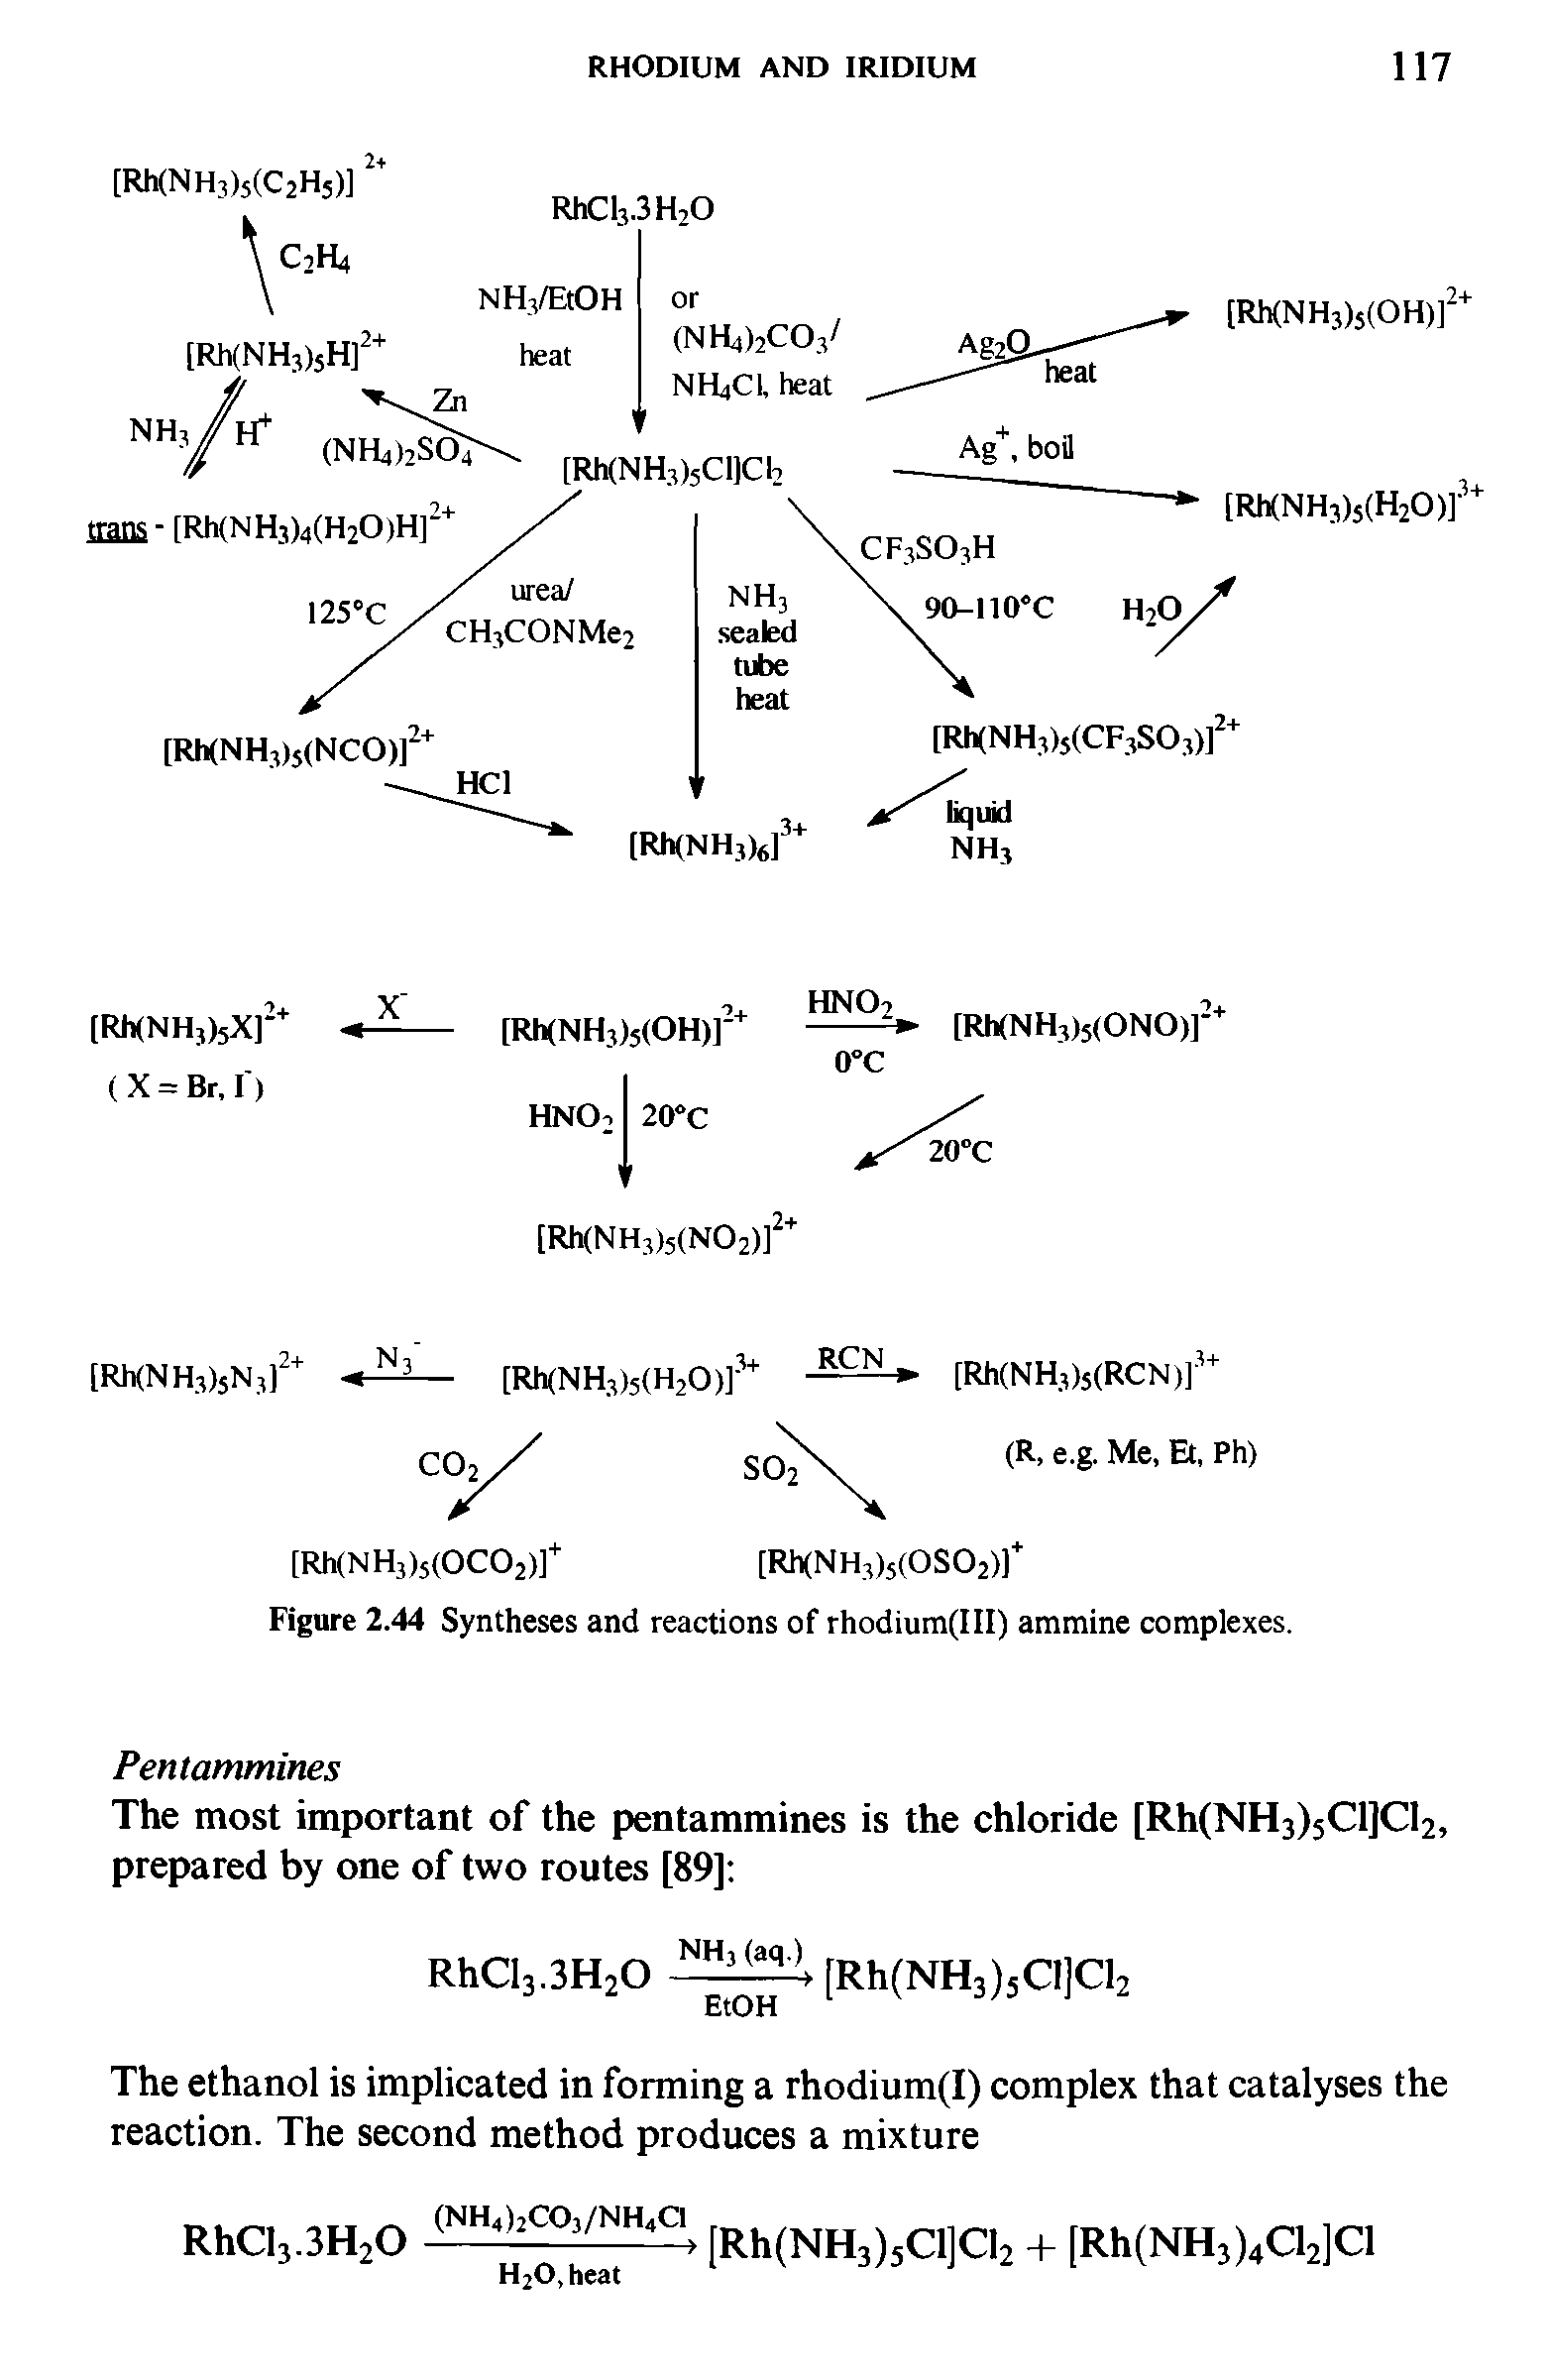 Figure 2.44 Syntheses and reactions of rhodium(III) ammine complexes.